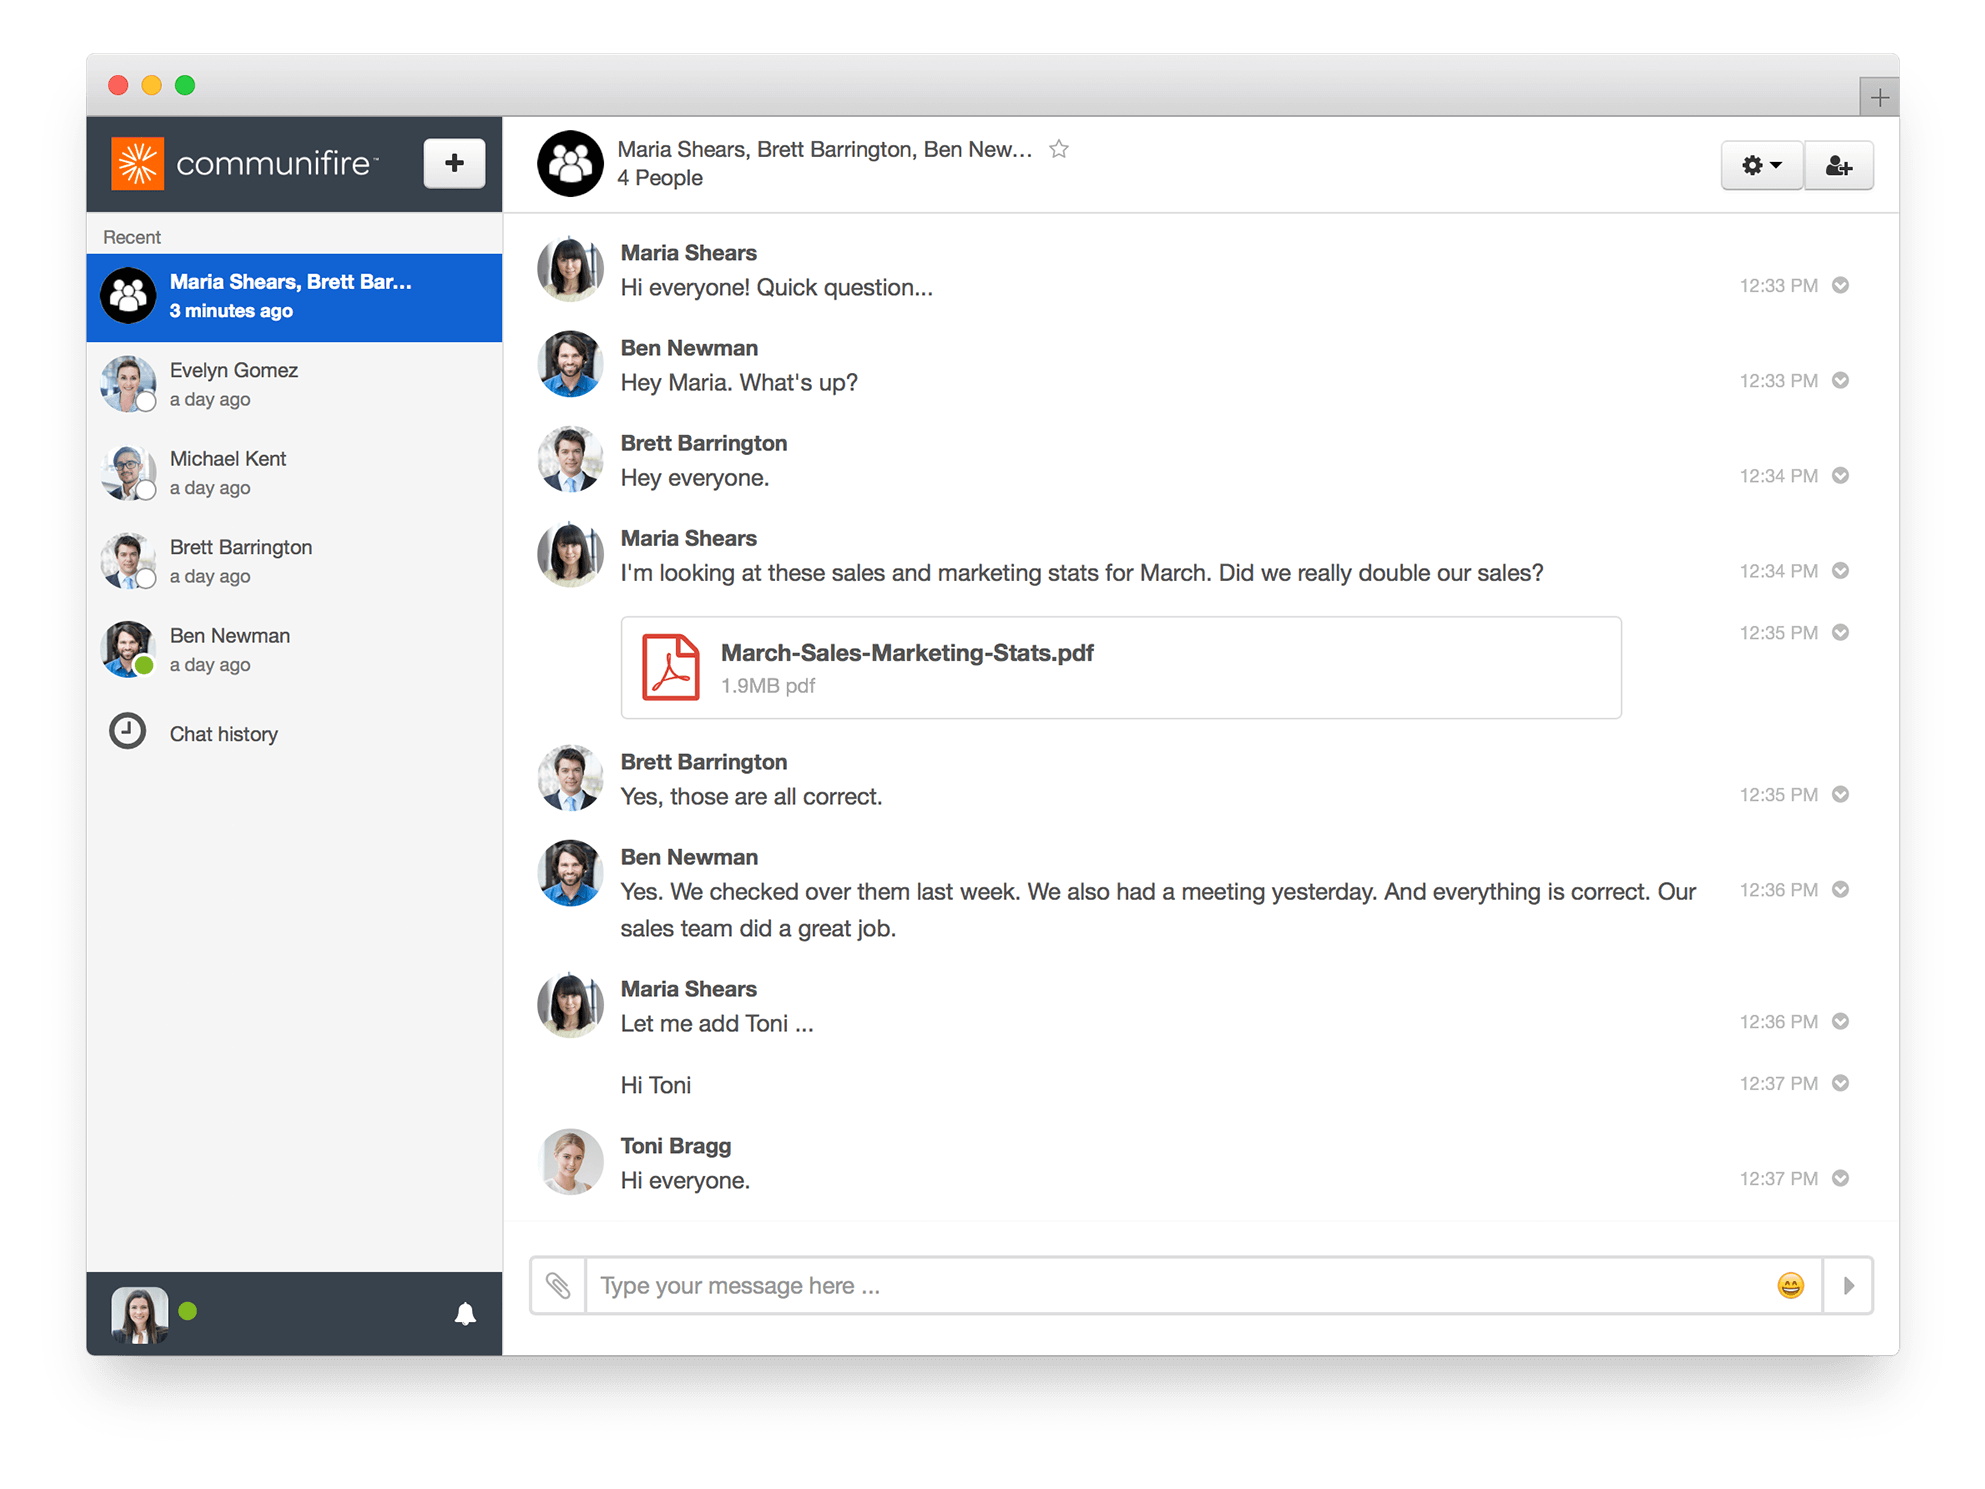 intranet features - chat and direct messaging